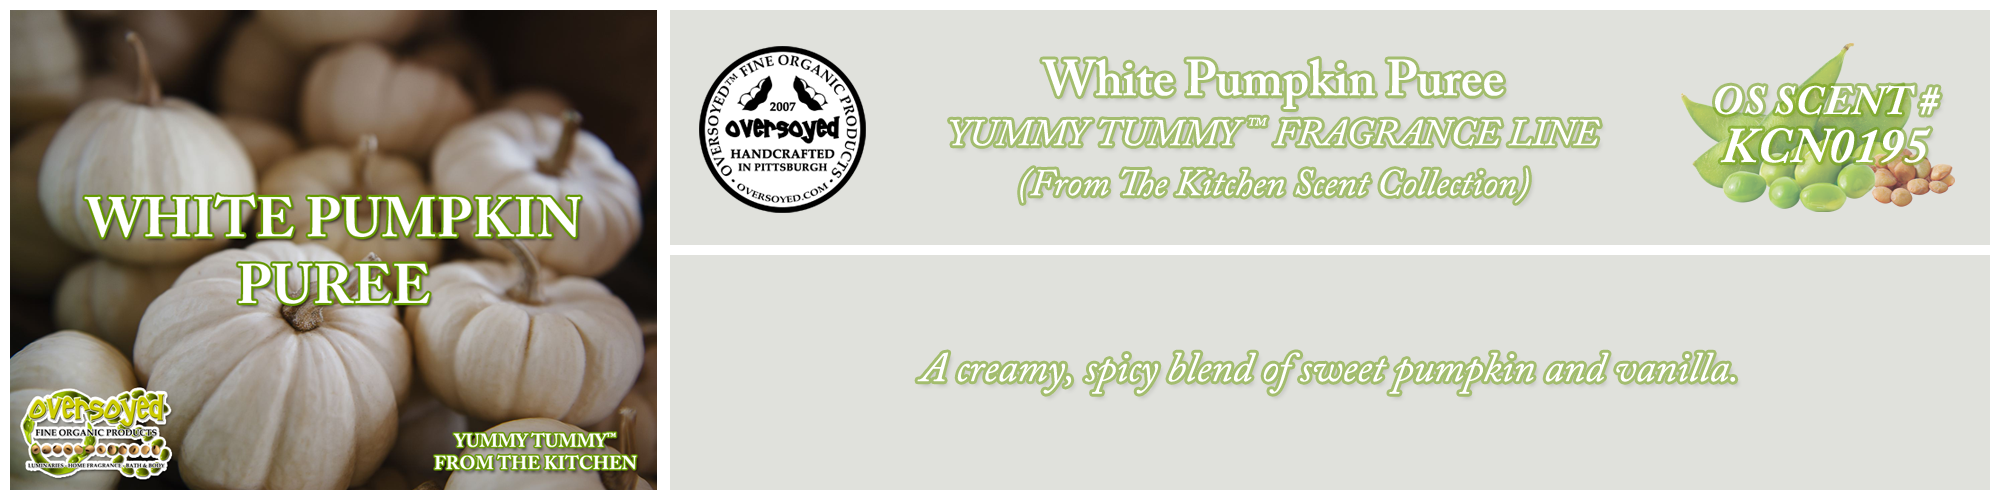 White Pumpkin Puree Handcrafted Products Collection